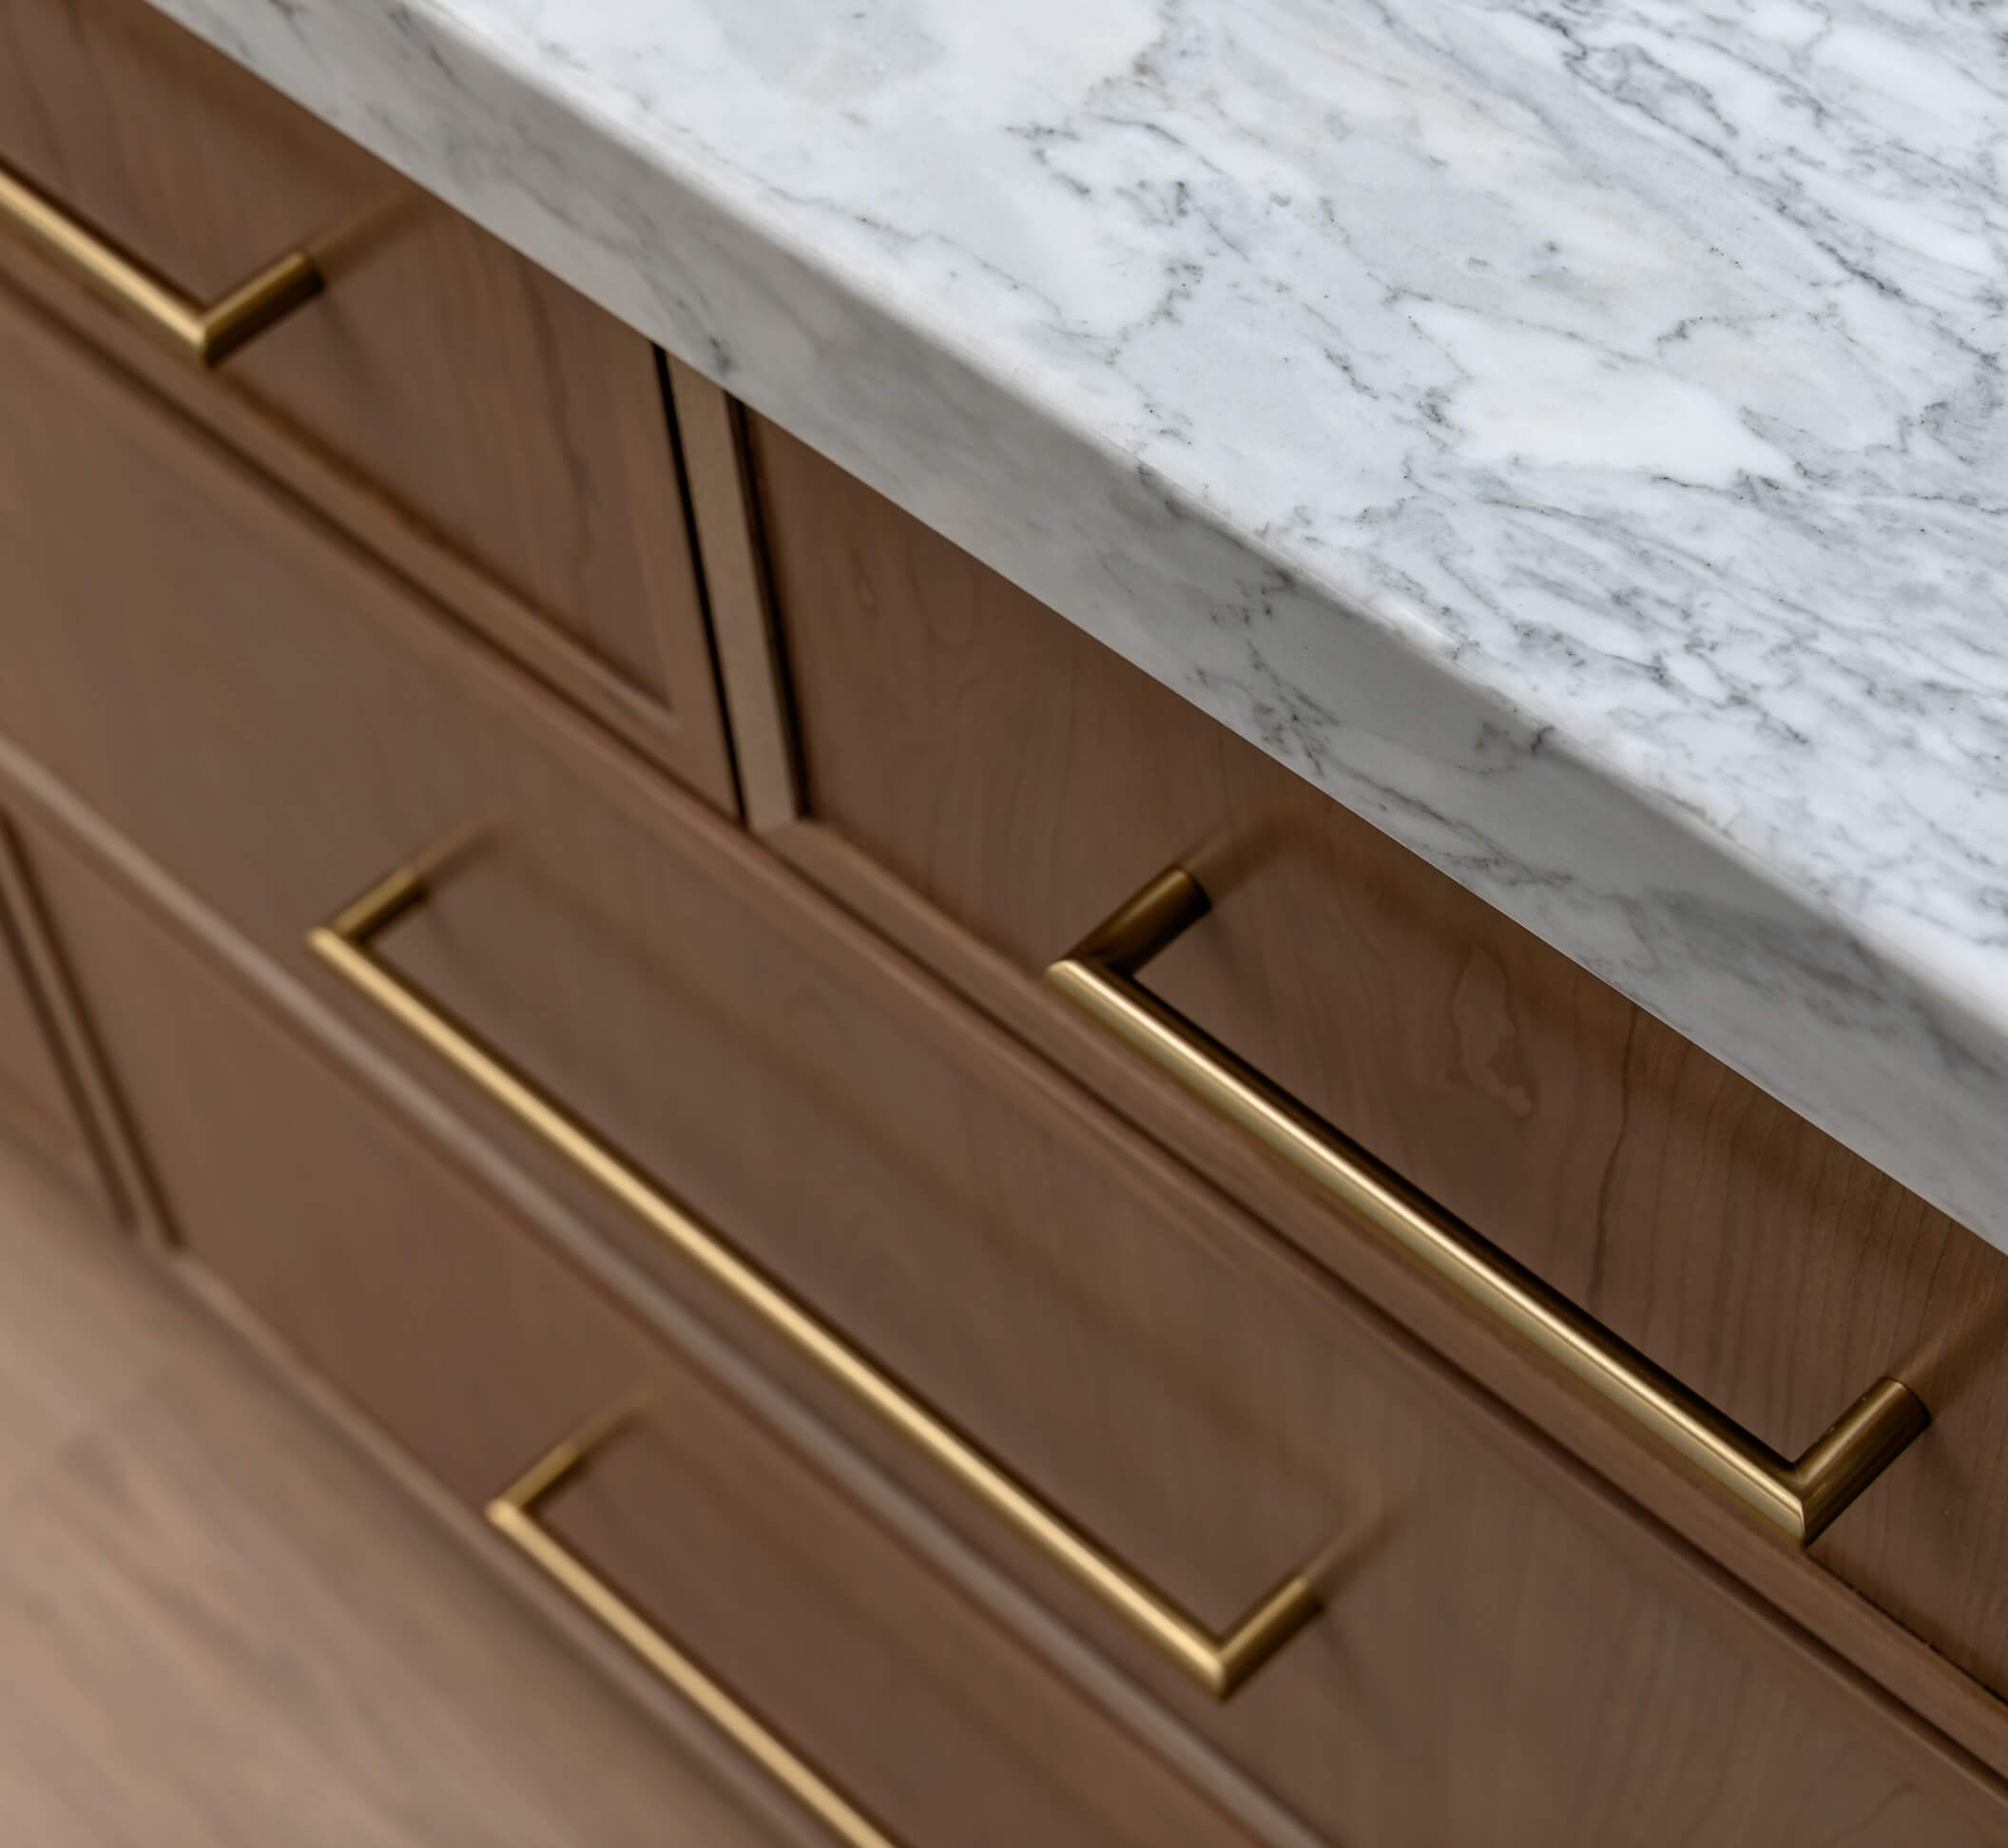 A close up of the modern shaker cabinet doors with thin rails and brushed brass hardware.